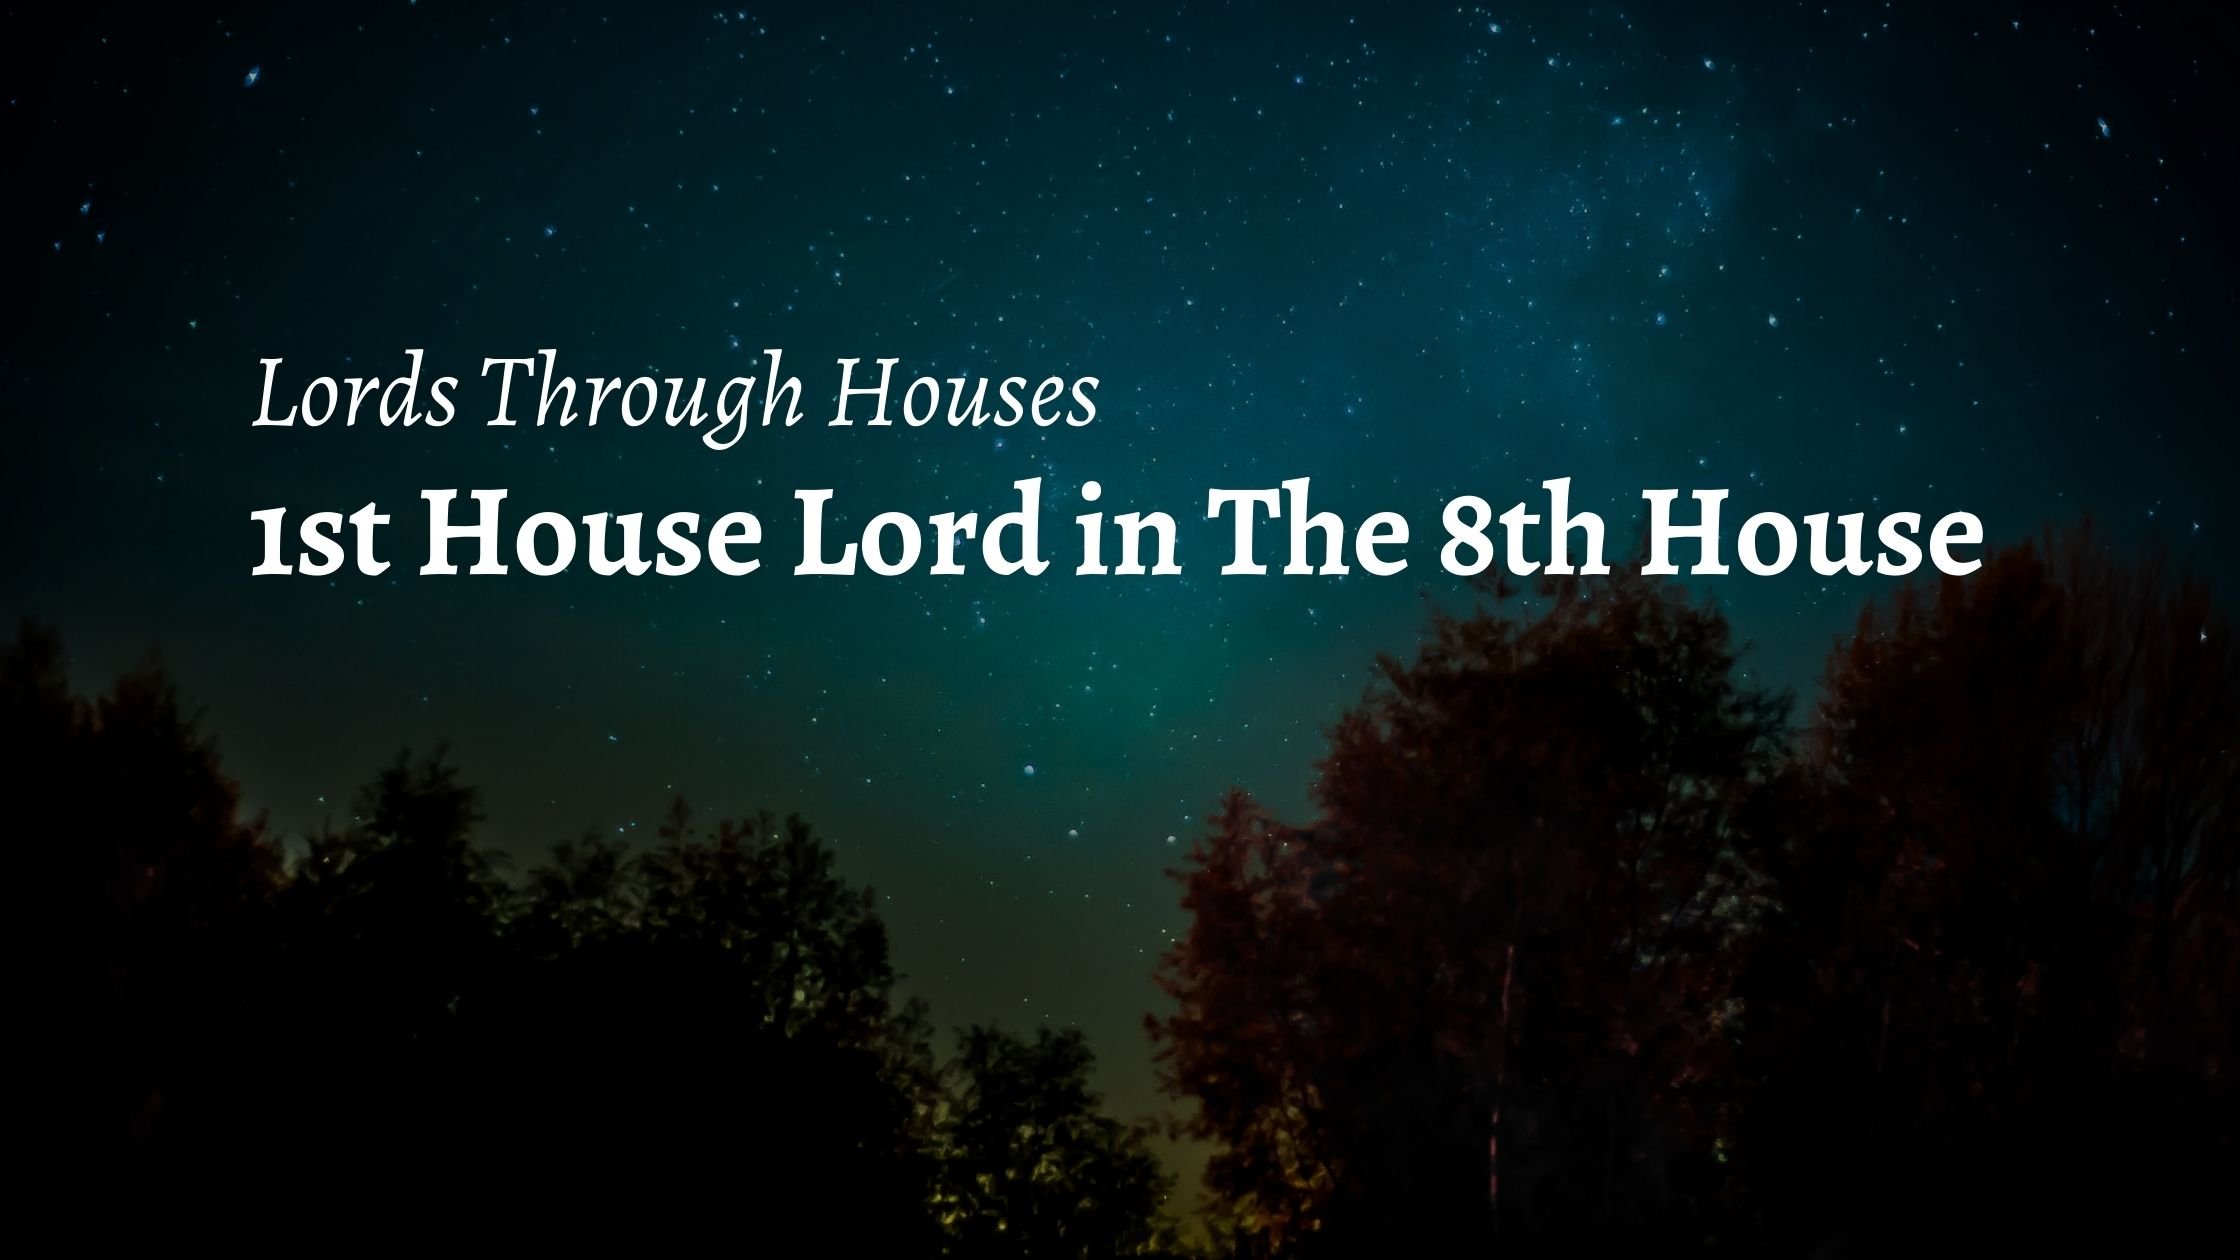 1st House Lord in The 8th House